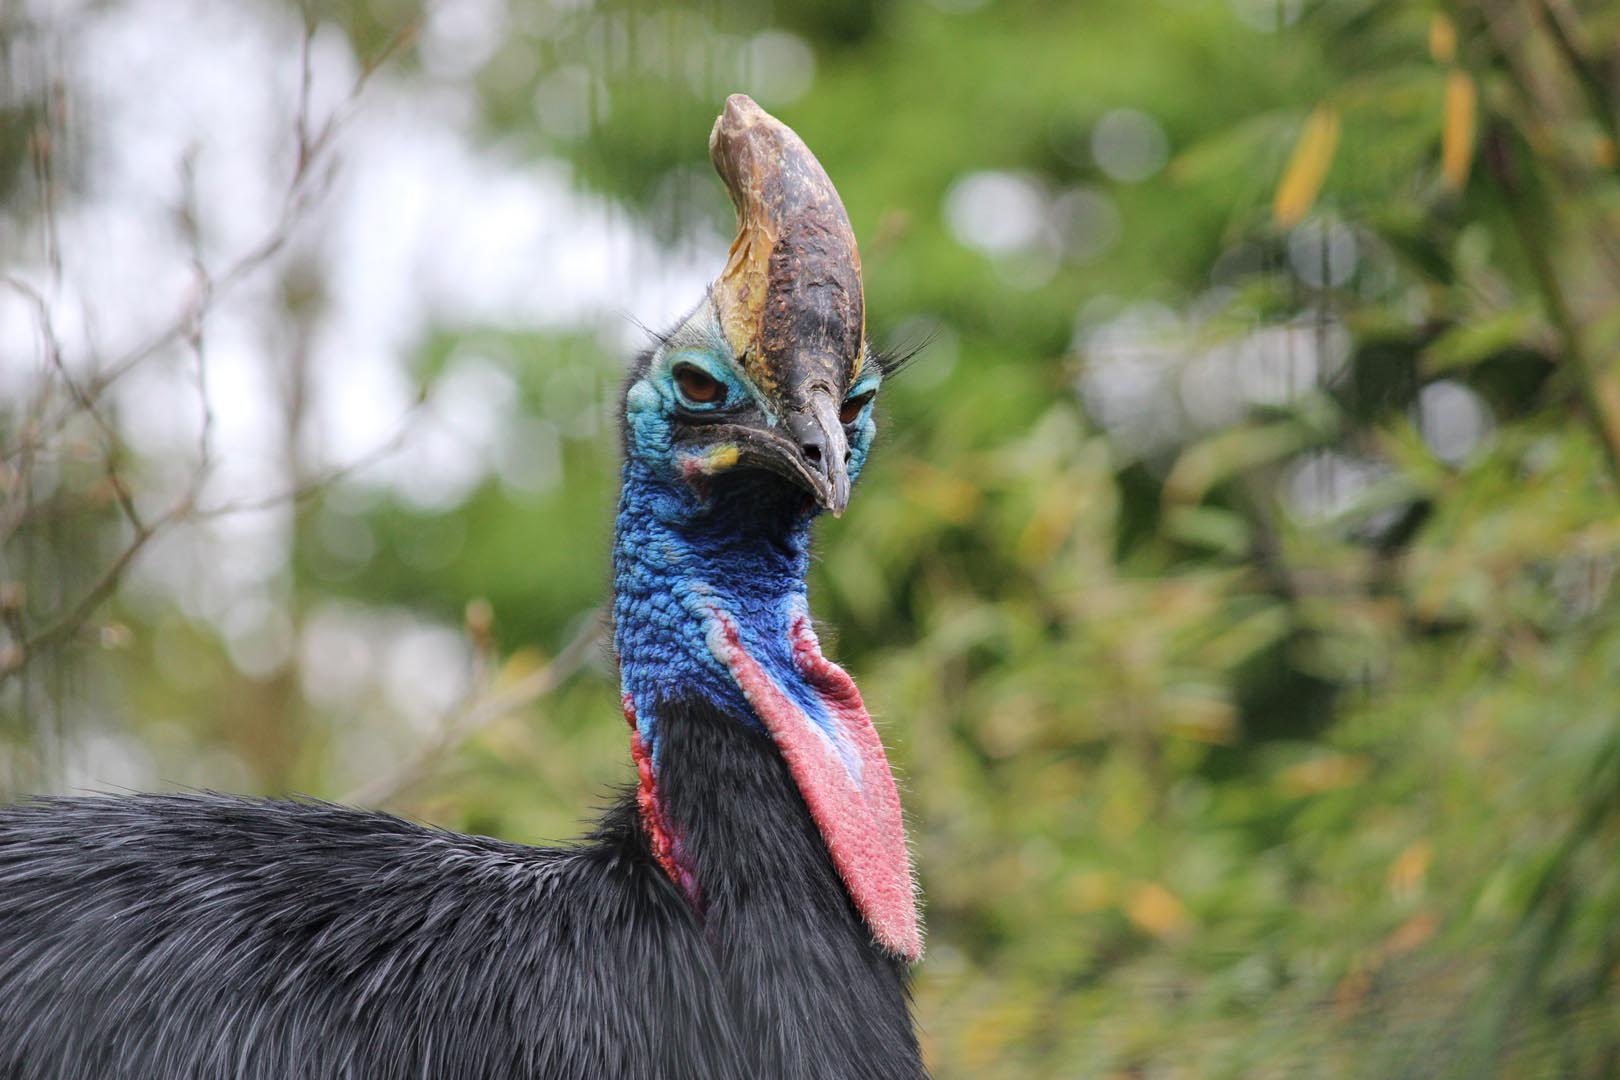 Southern cassowary looking at the camera (eye-contact) IMAGE: Hollie Watson (2021)